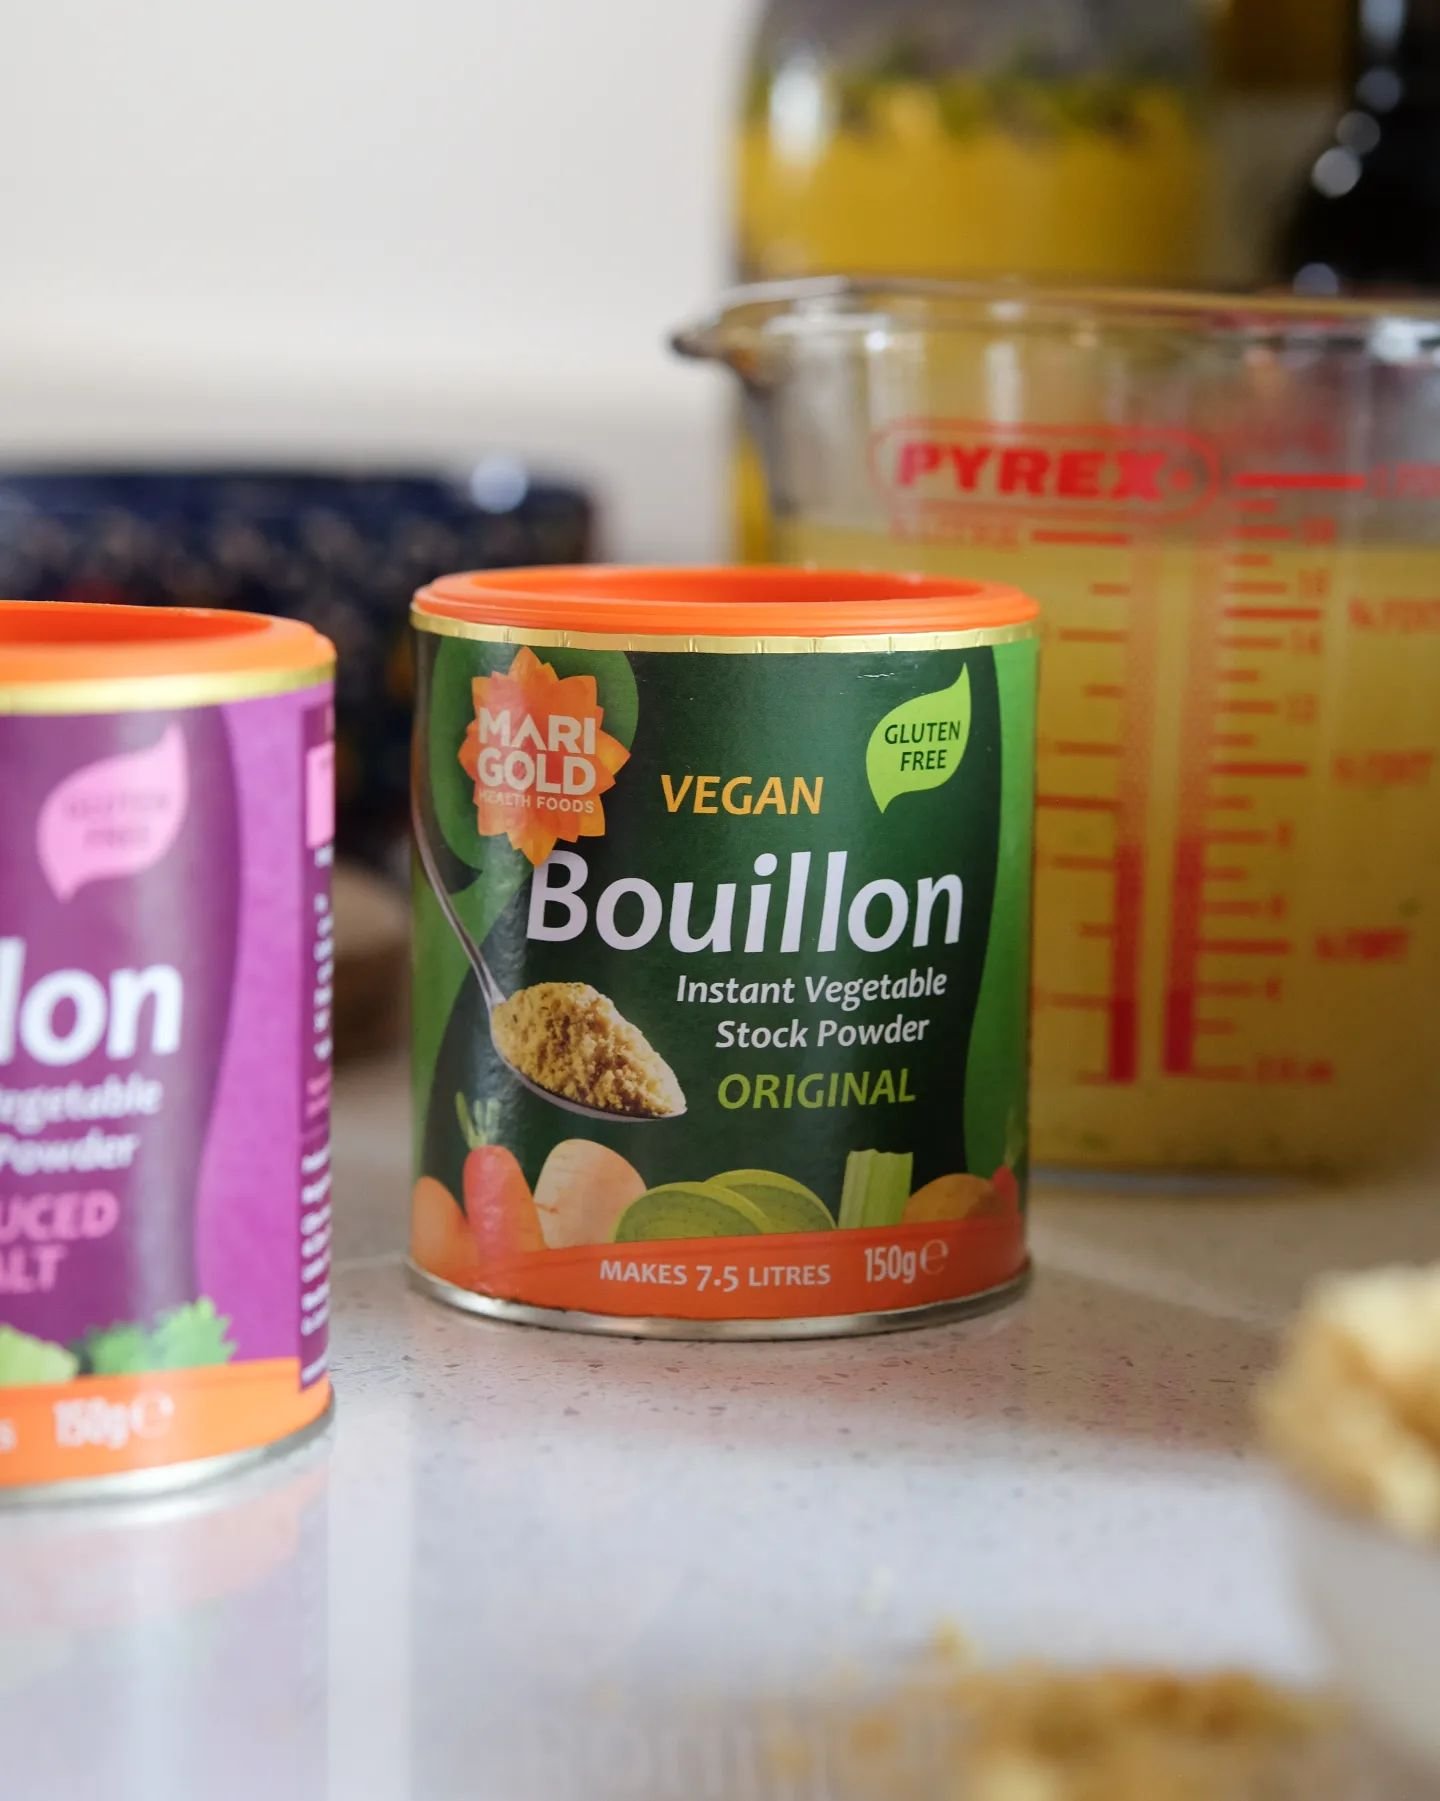 Vegan Bouillon Original Instant Vegetable Stock Powder 150g
🌱
We call it 'Little Green' here at HQ and it's our most popular bouillon
👍

💚 Vegan
💚 Gluten free
💚 Now palm oil free
💚 Perfect natural ingredient for soups, stews, casseroles, sauces